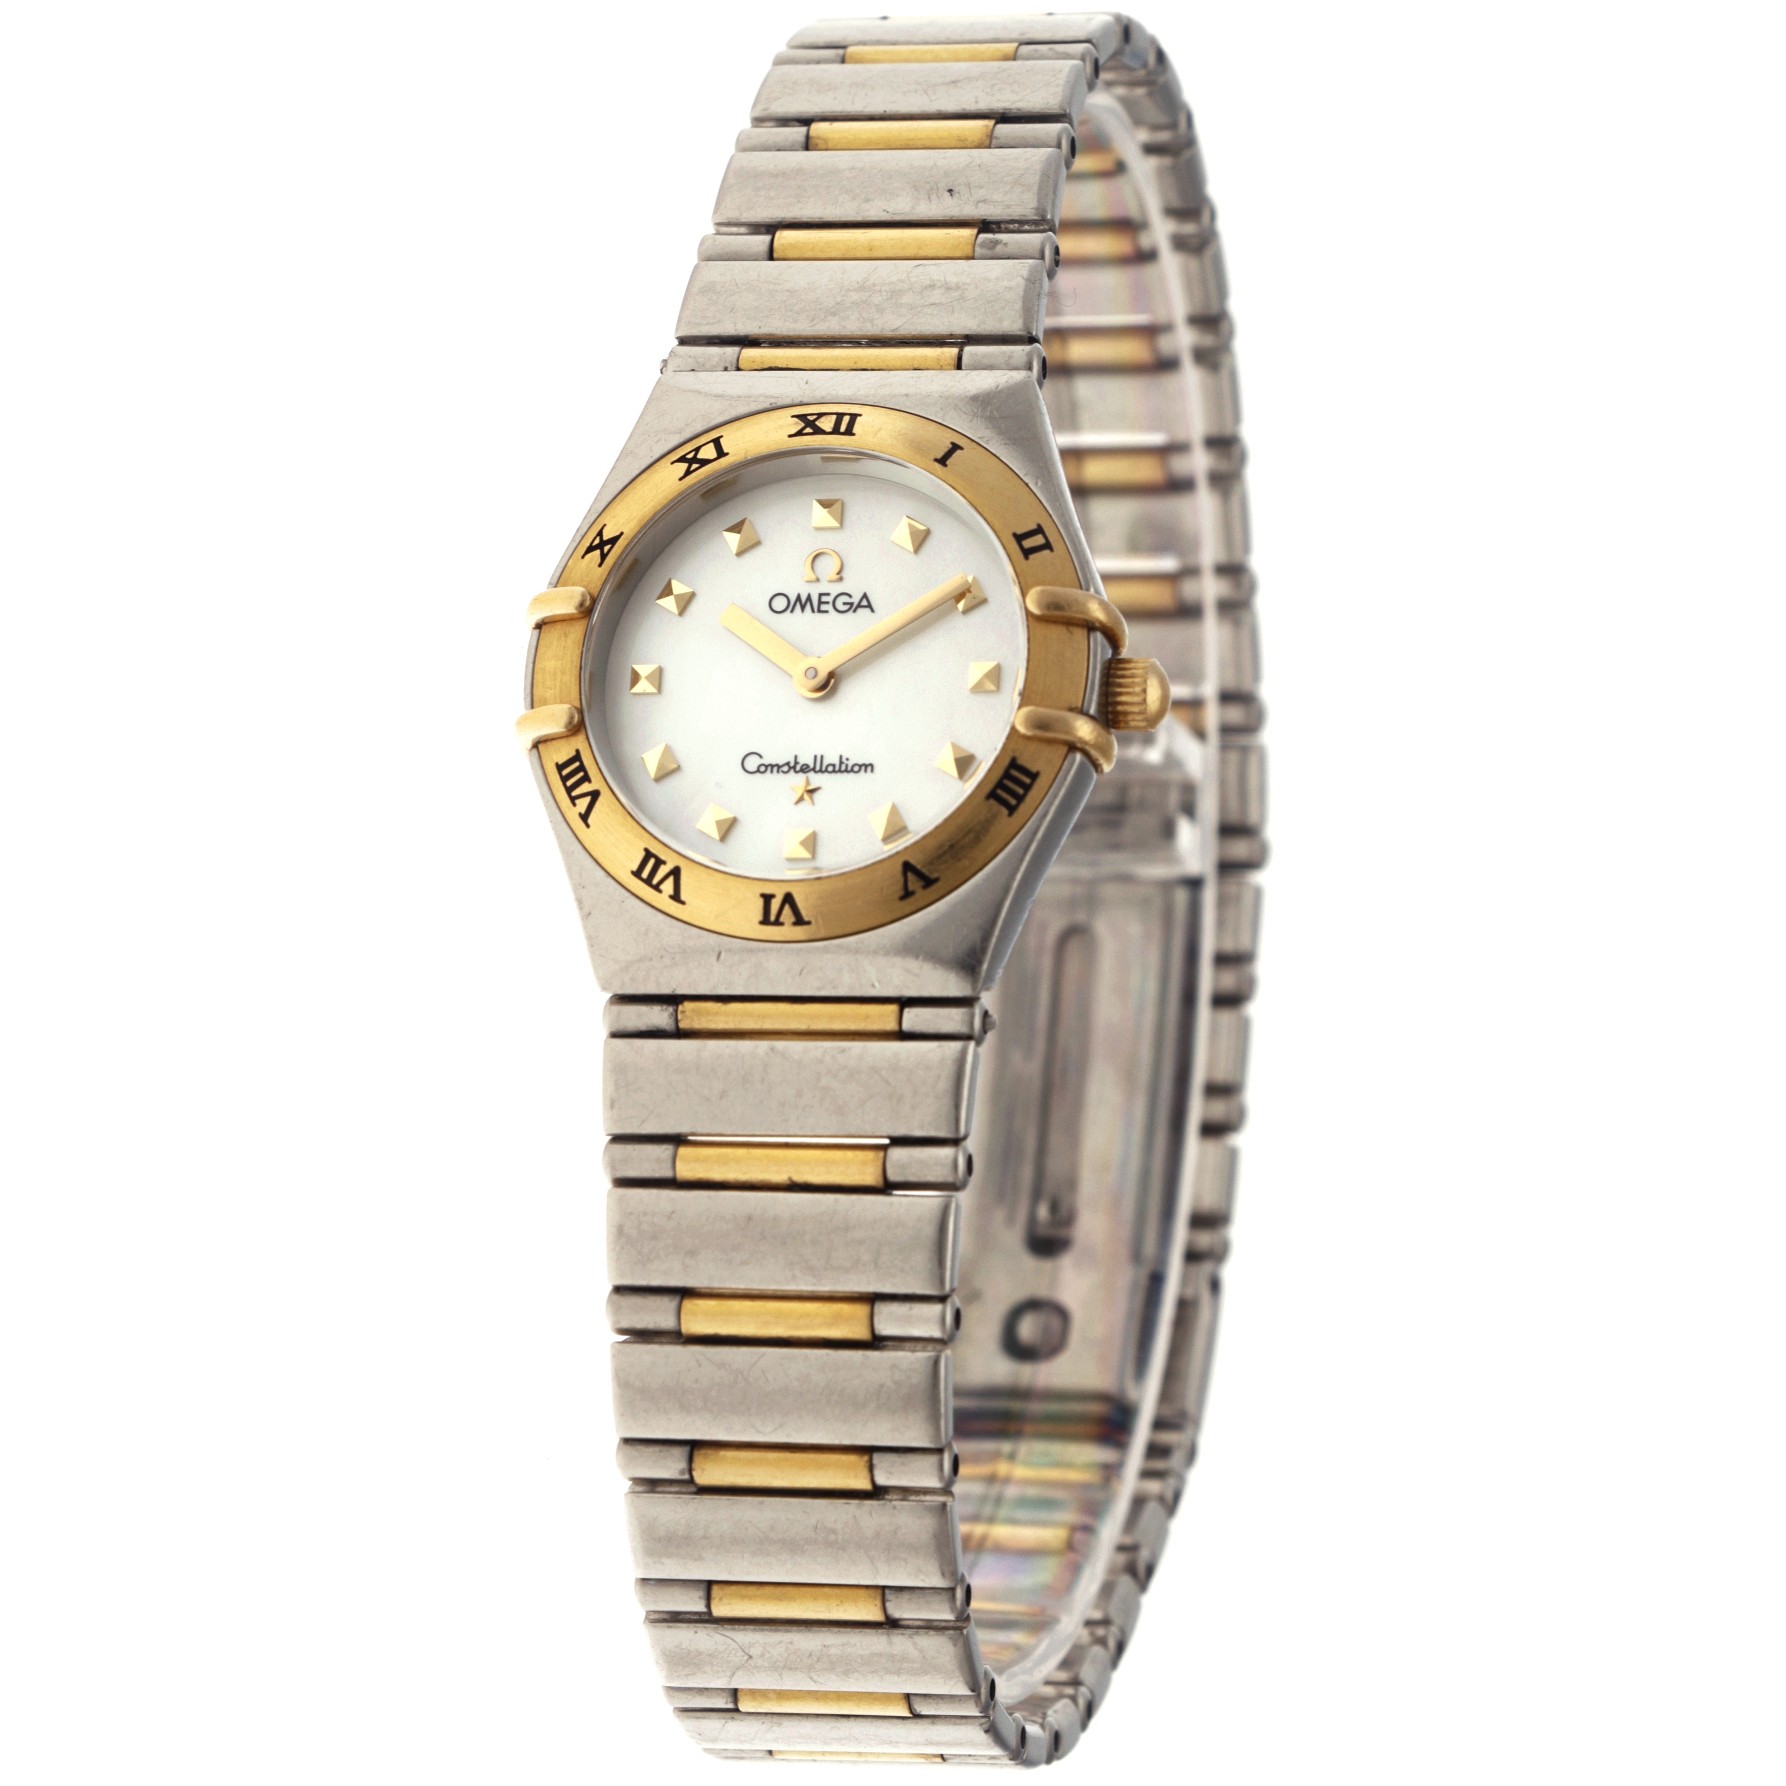 No Reserve - Omega Constellation Ladies 'My Choice' Mother of Pearl 795.1241 - Ladies watch. - Image 2 of 5